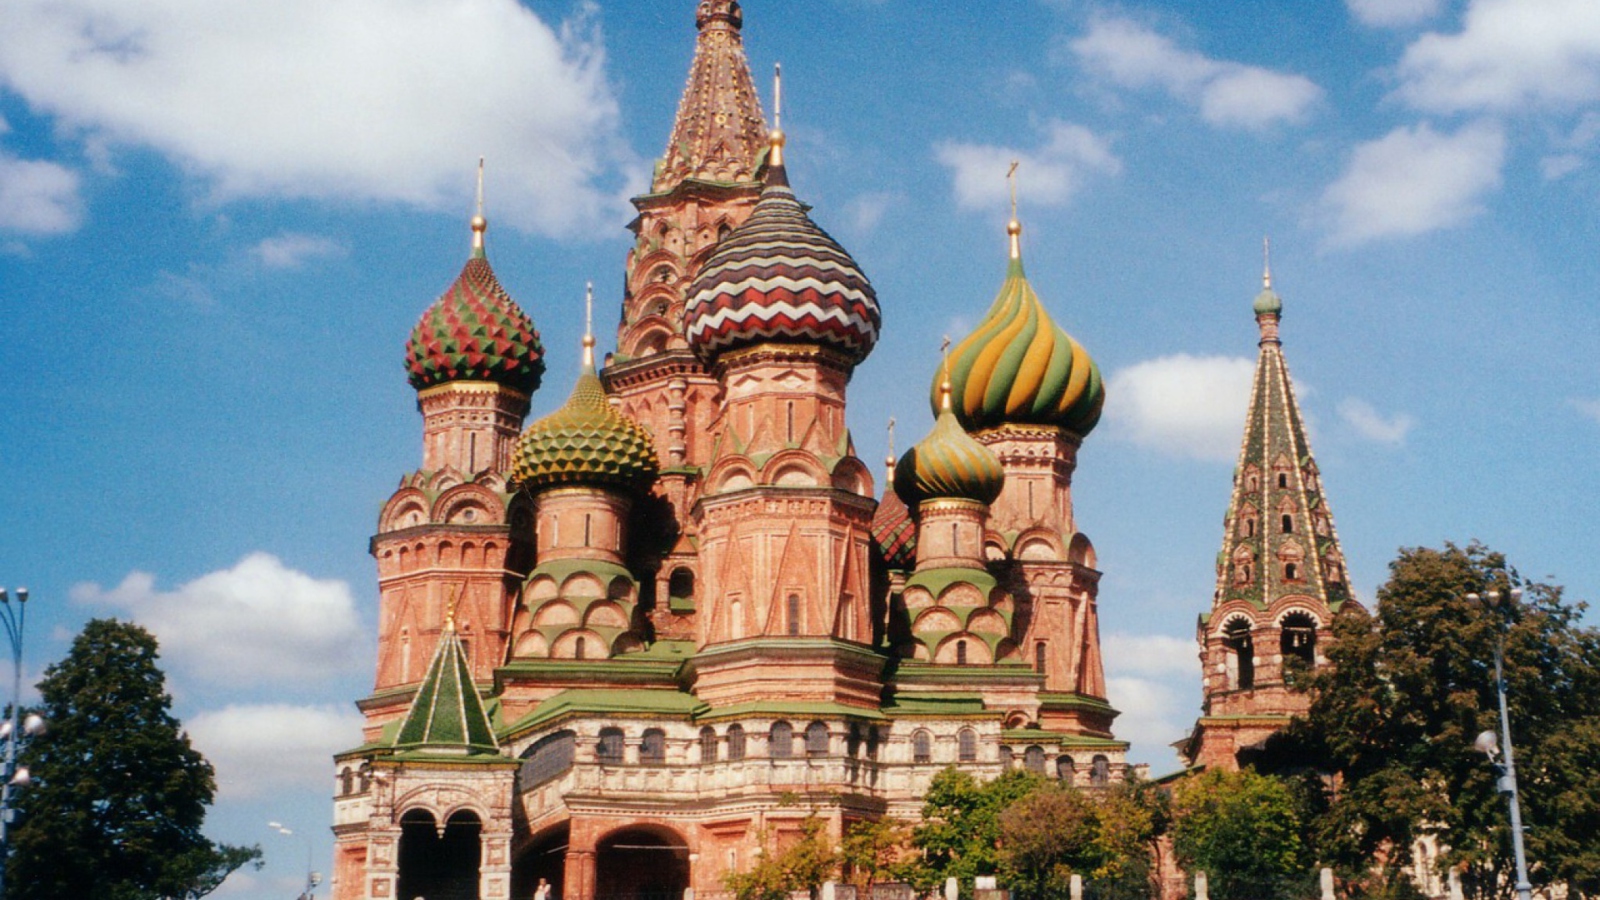 St. Basil's Cathedral On Red Square, Moscow screenshot #1 1600x900